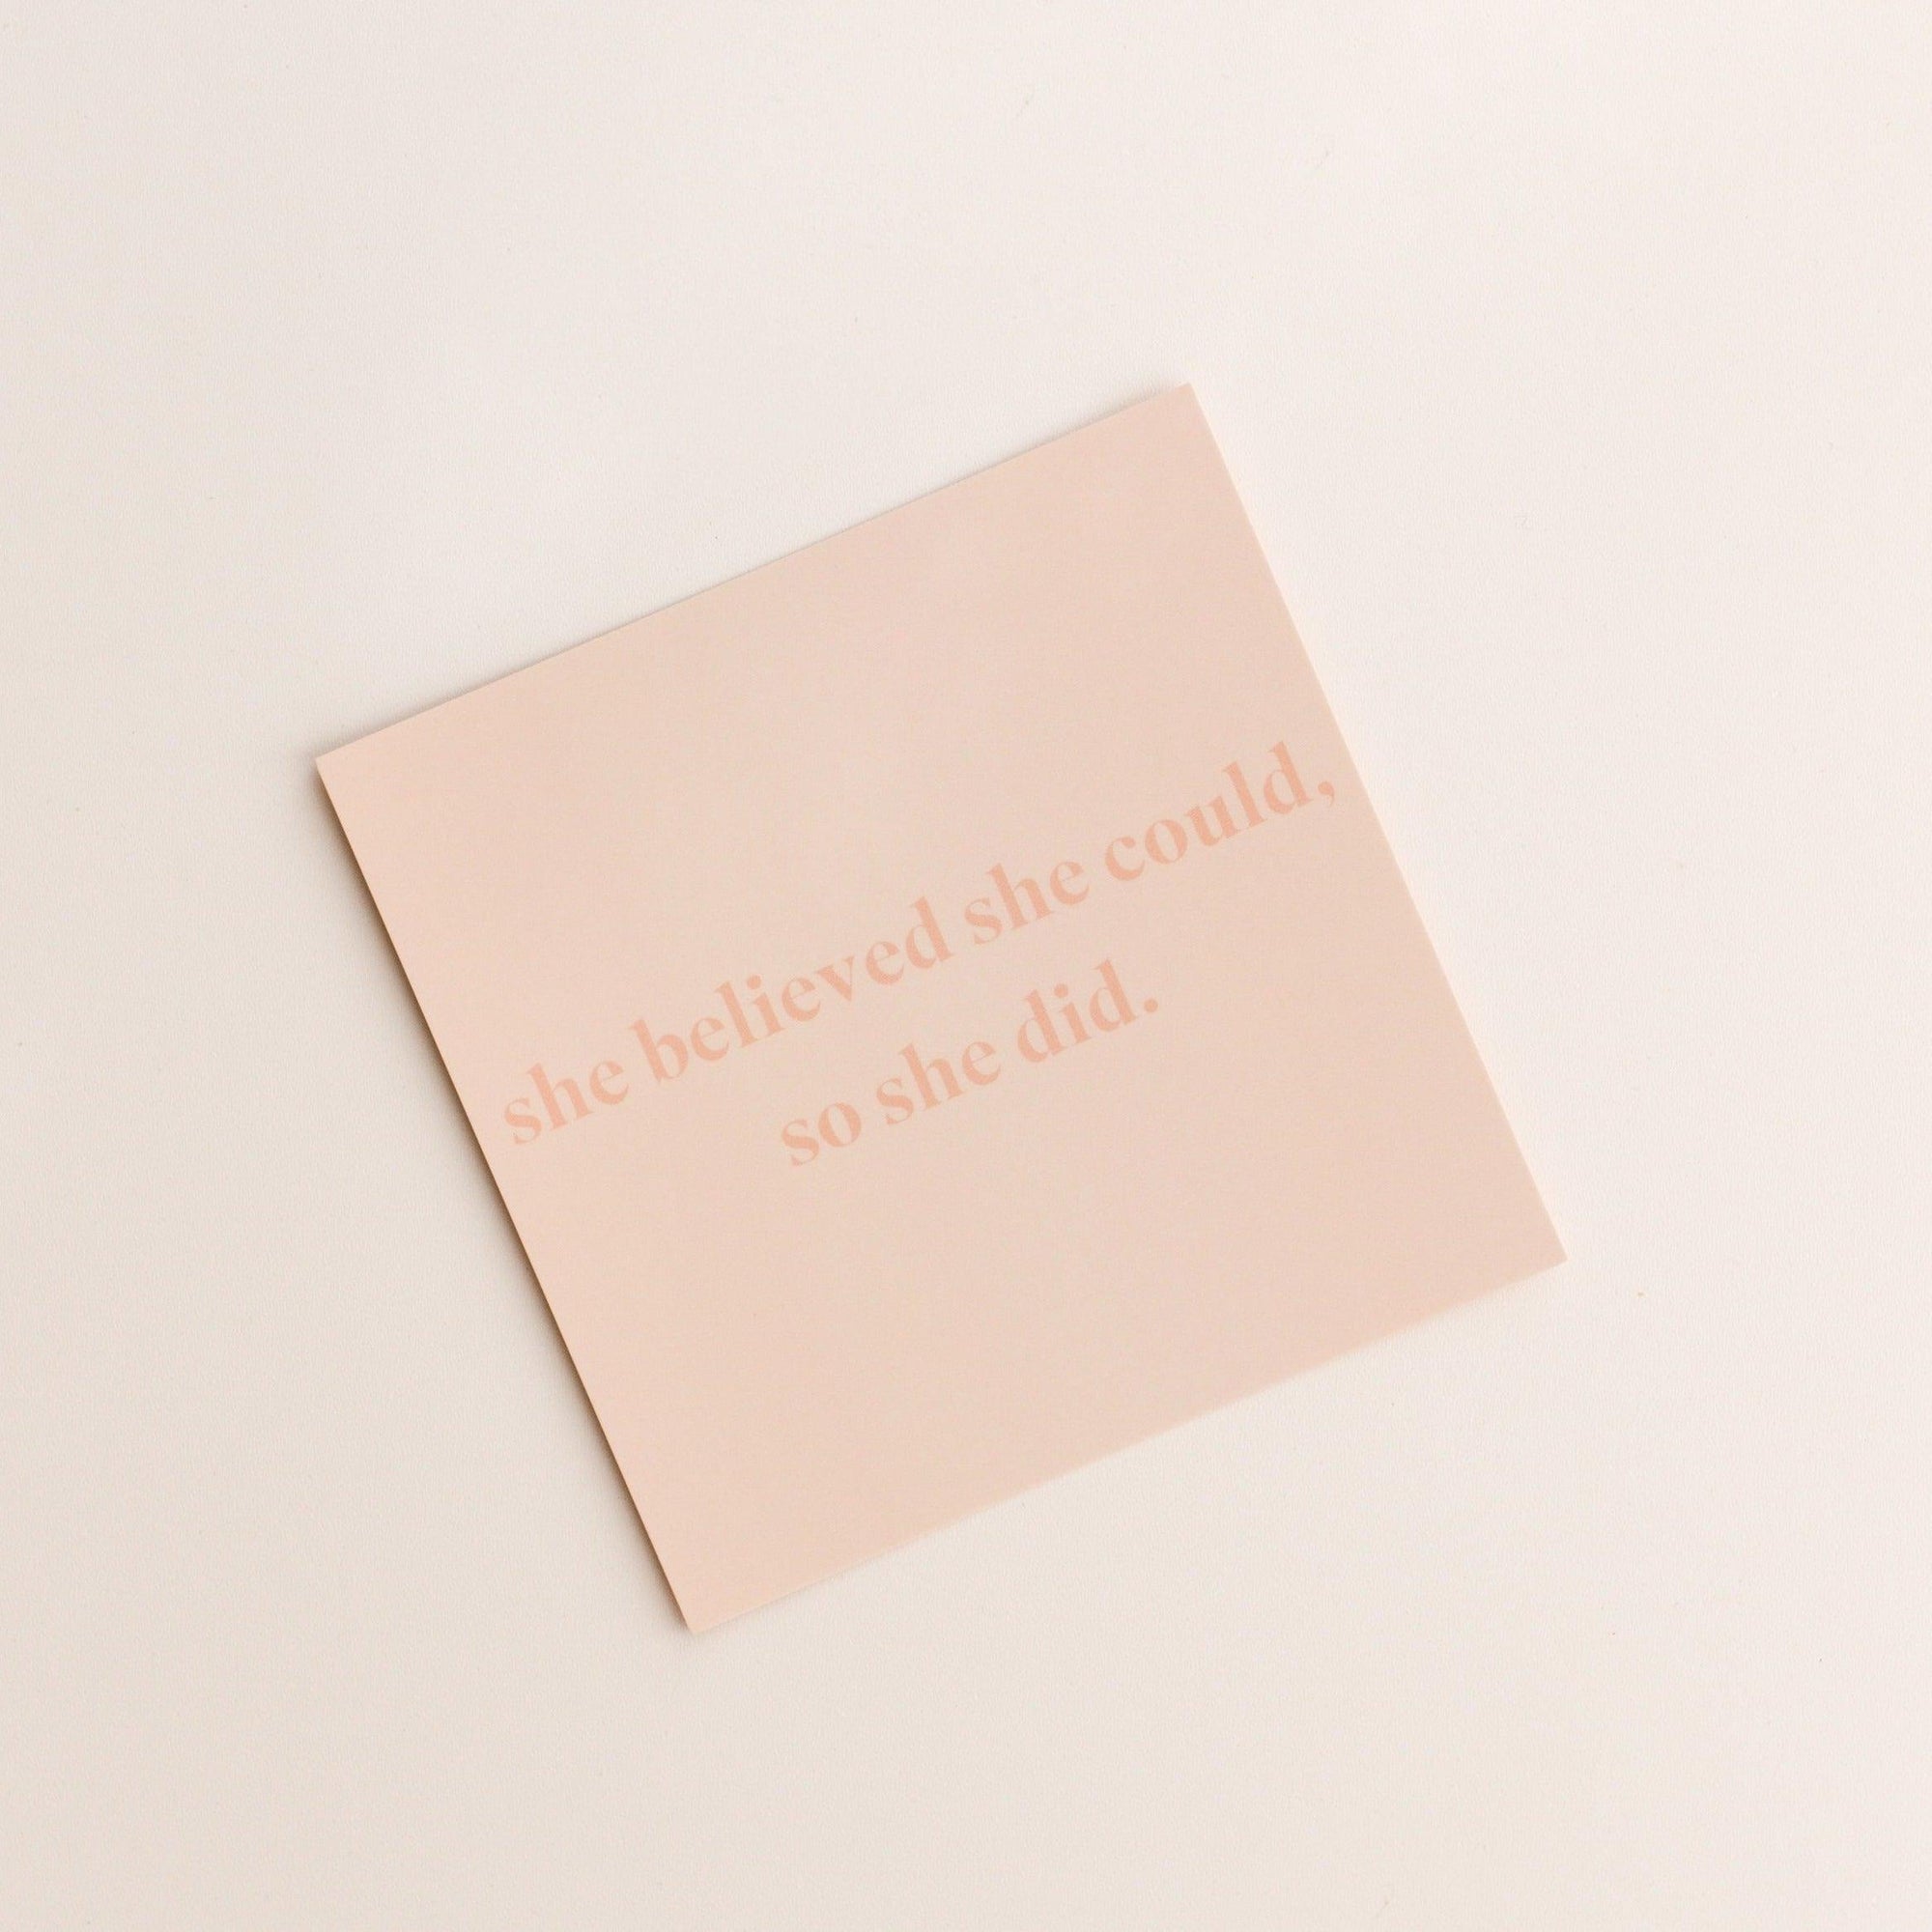 she believed she could, so she did | gift card